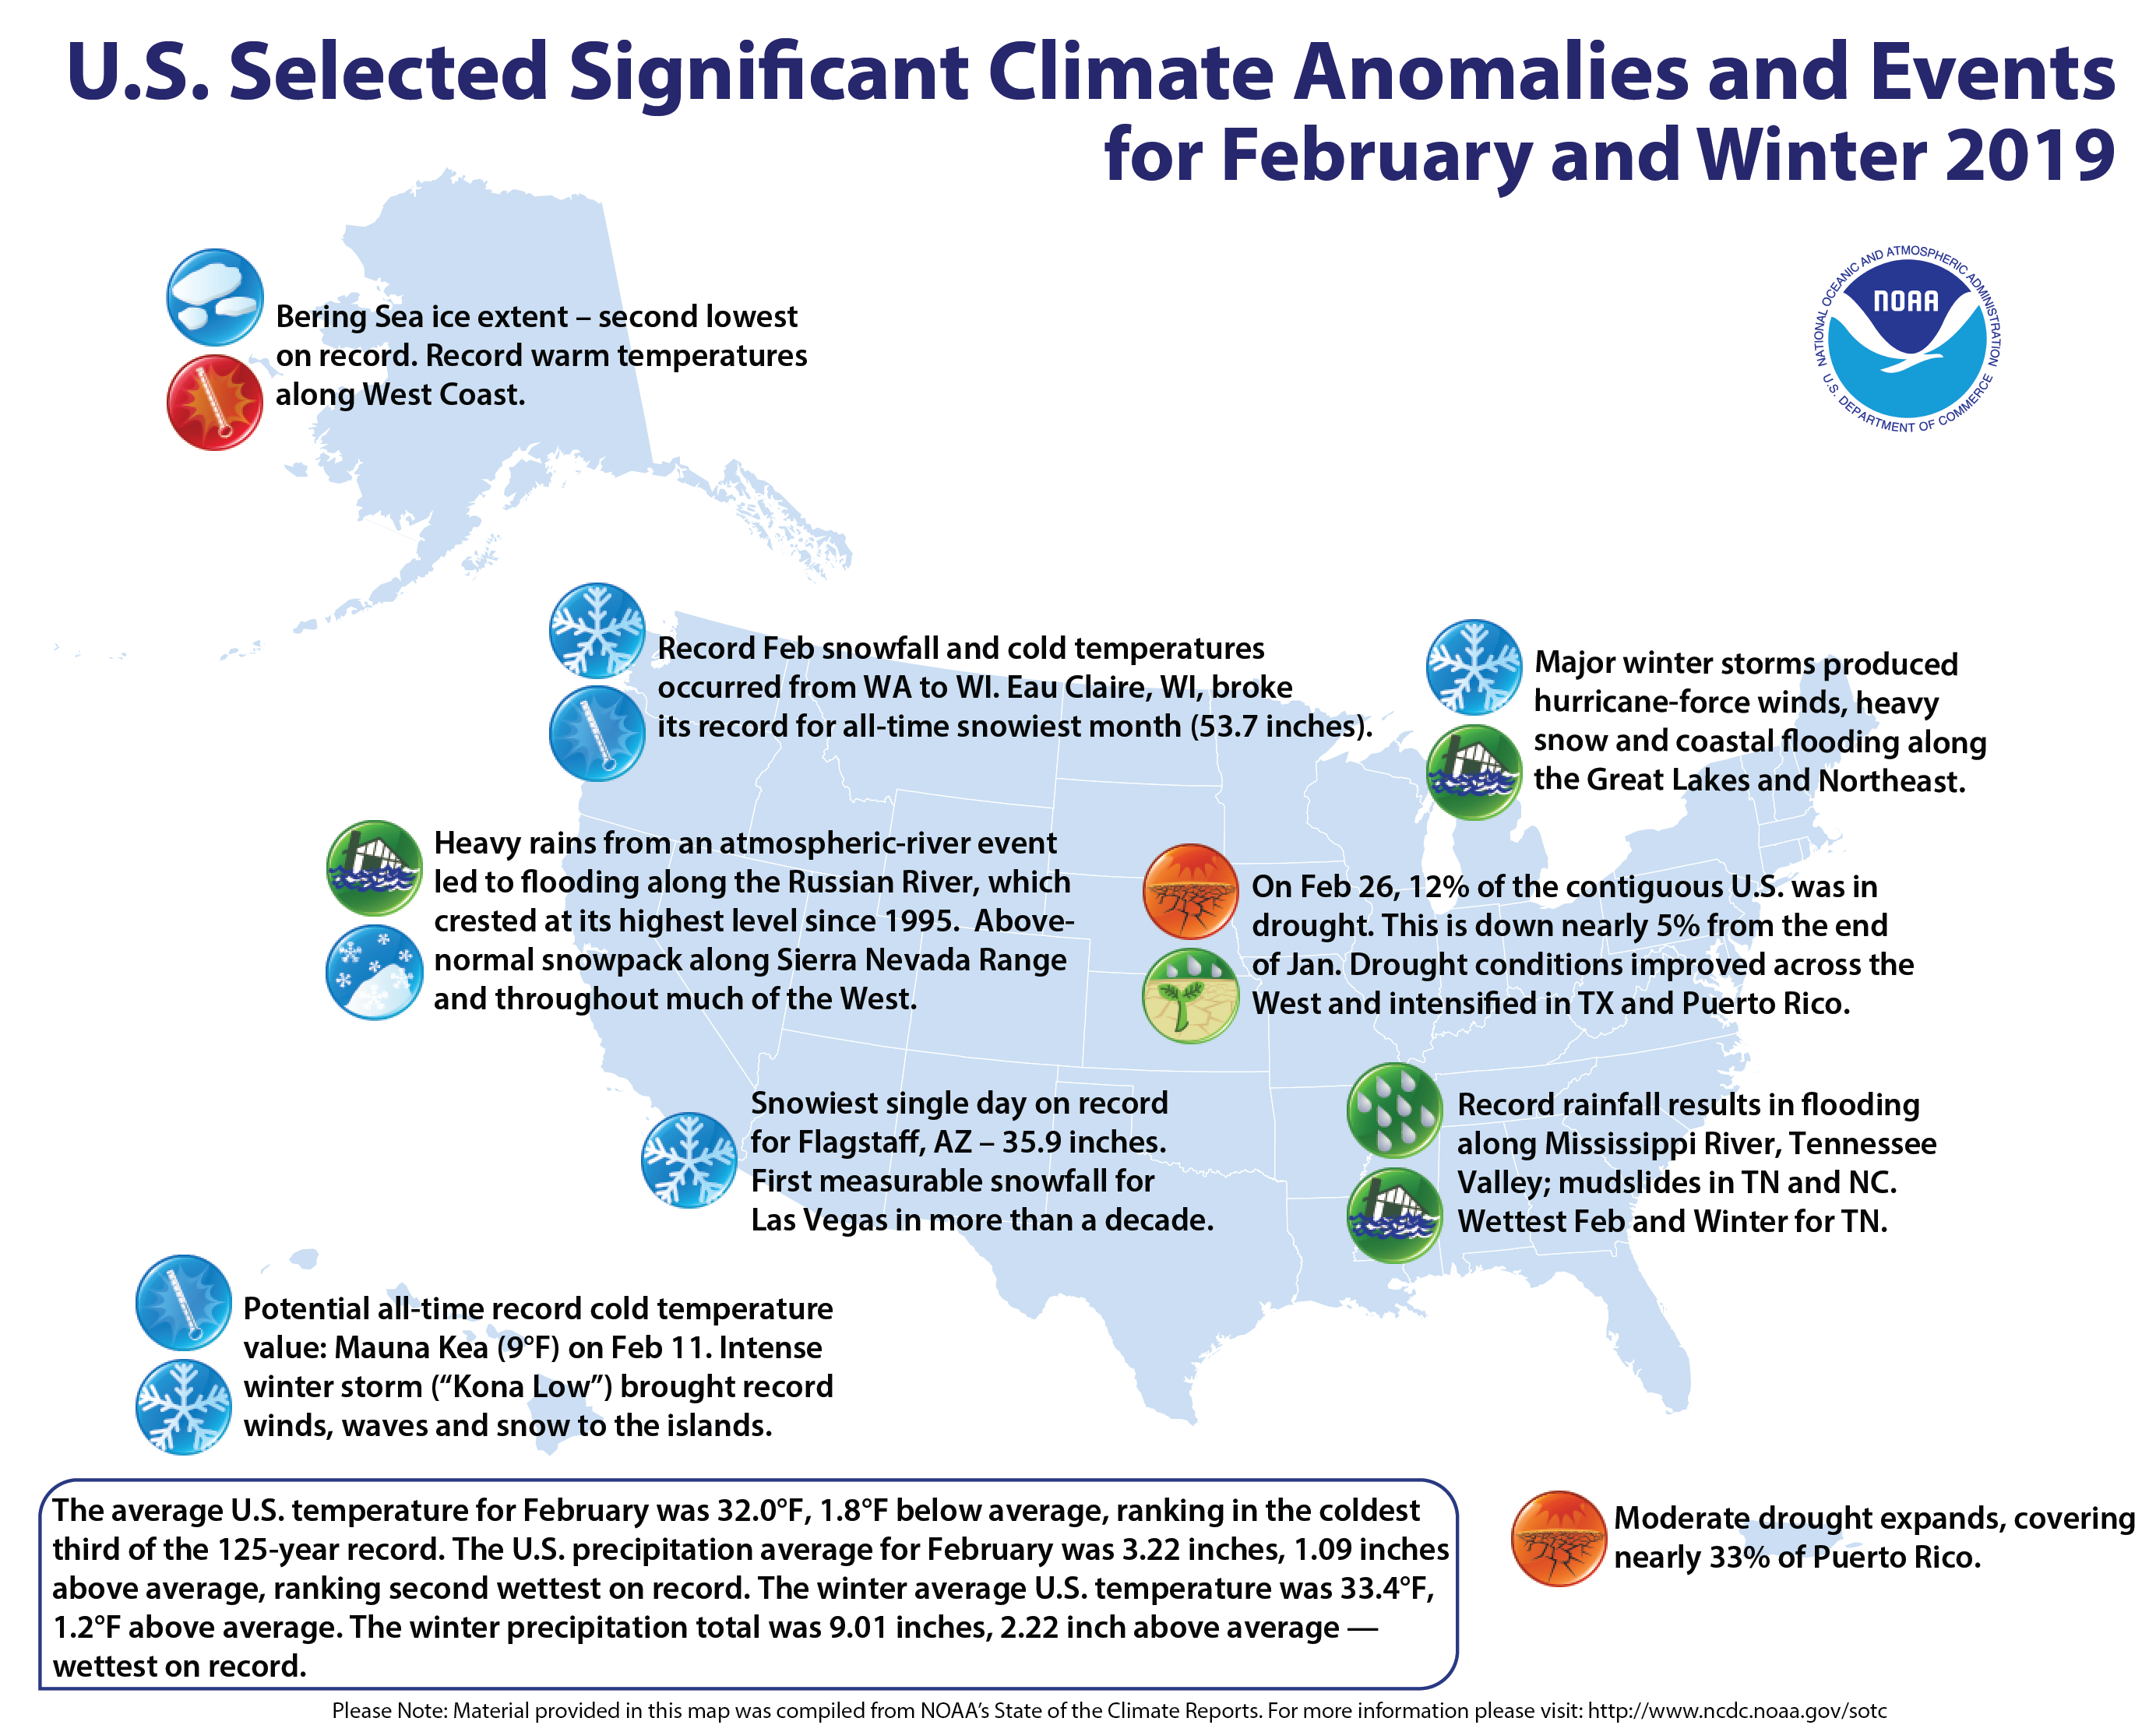 An annotated map of the United States showing notable climate events that occurred across the country during Winter and February 2019. For details, see the bulleted list below in the story and online at http://bit.ly/USClimate201902